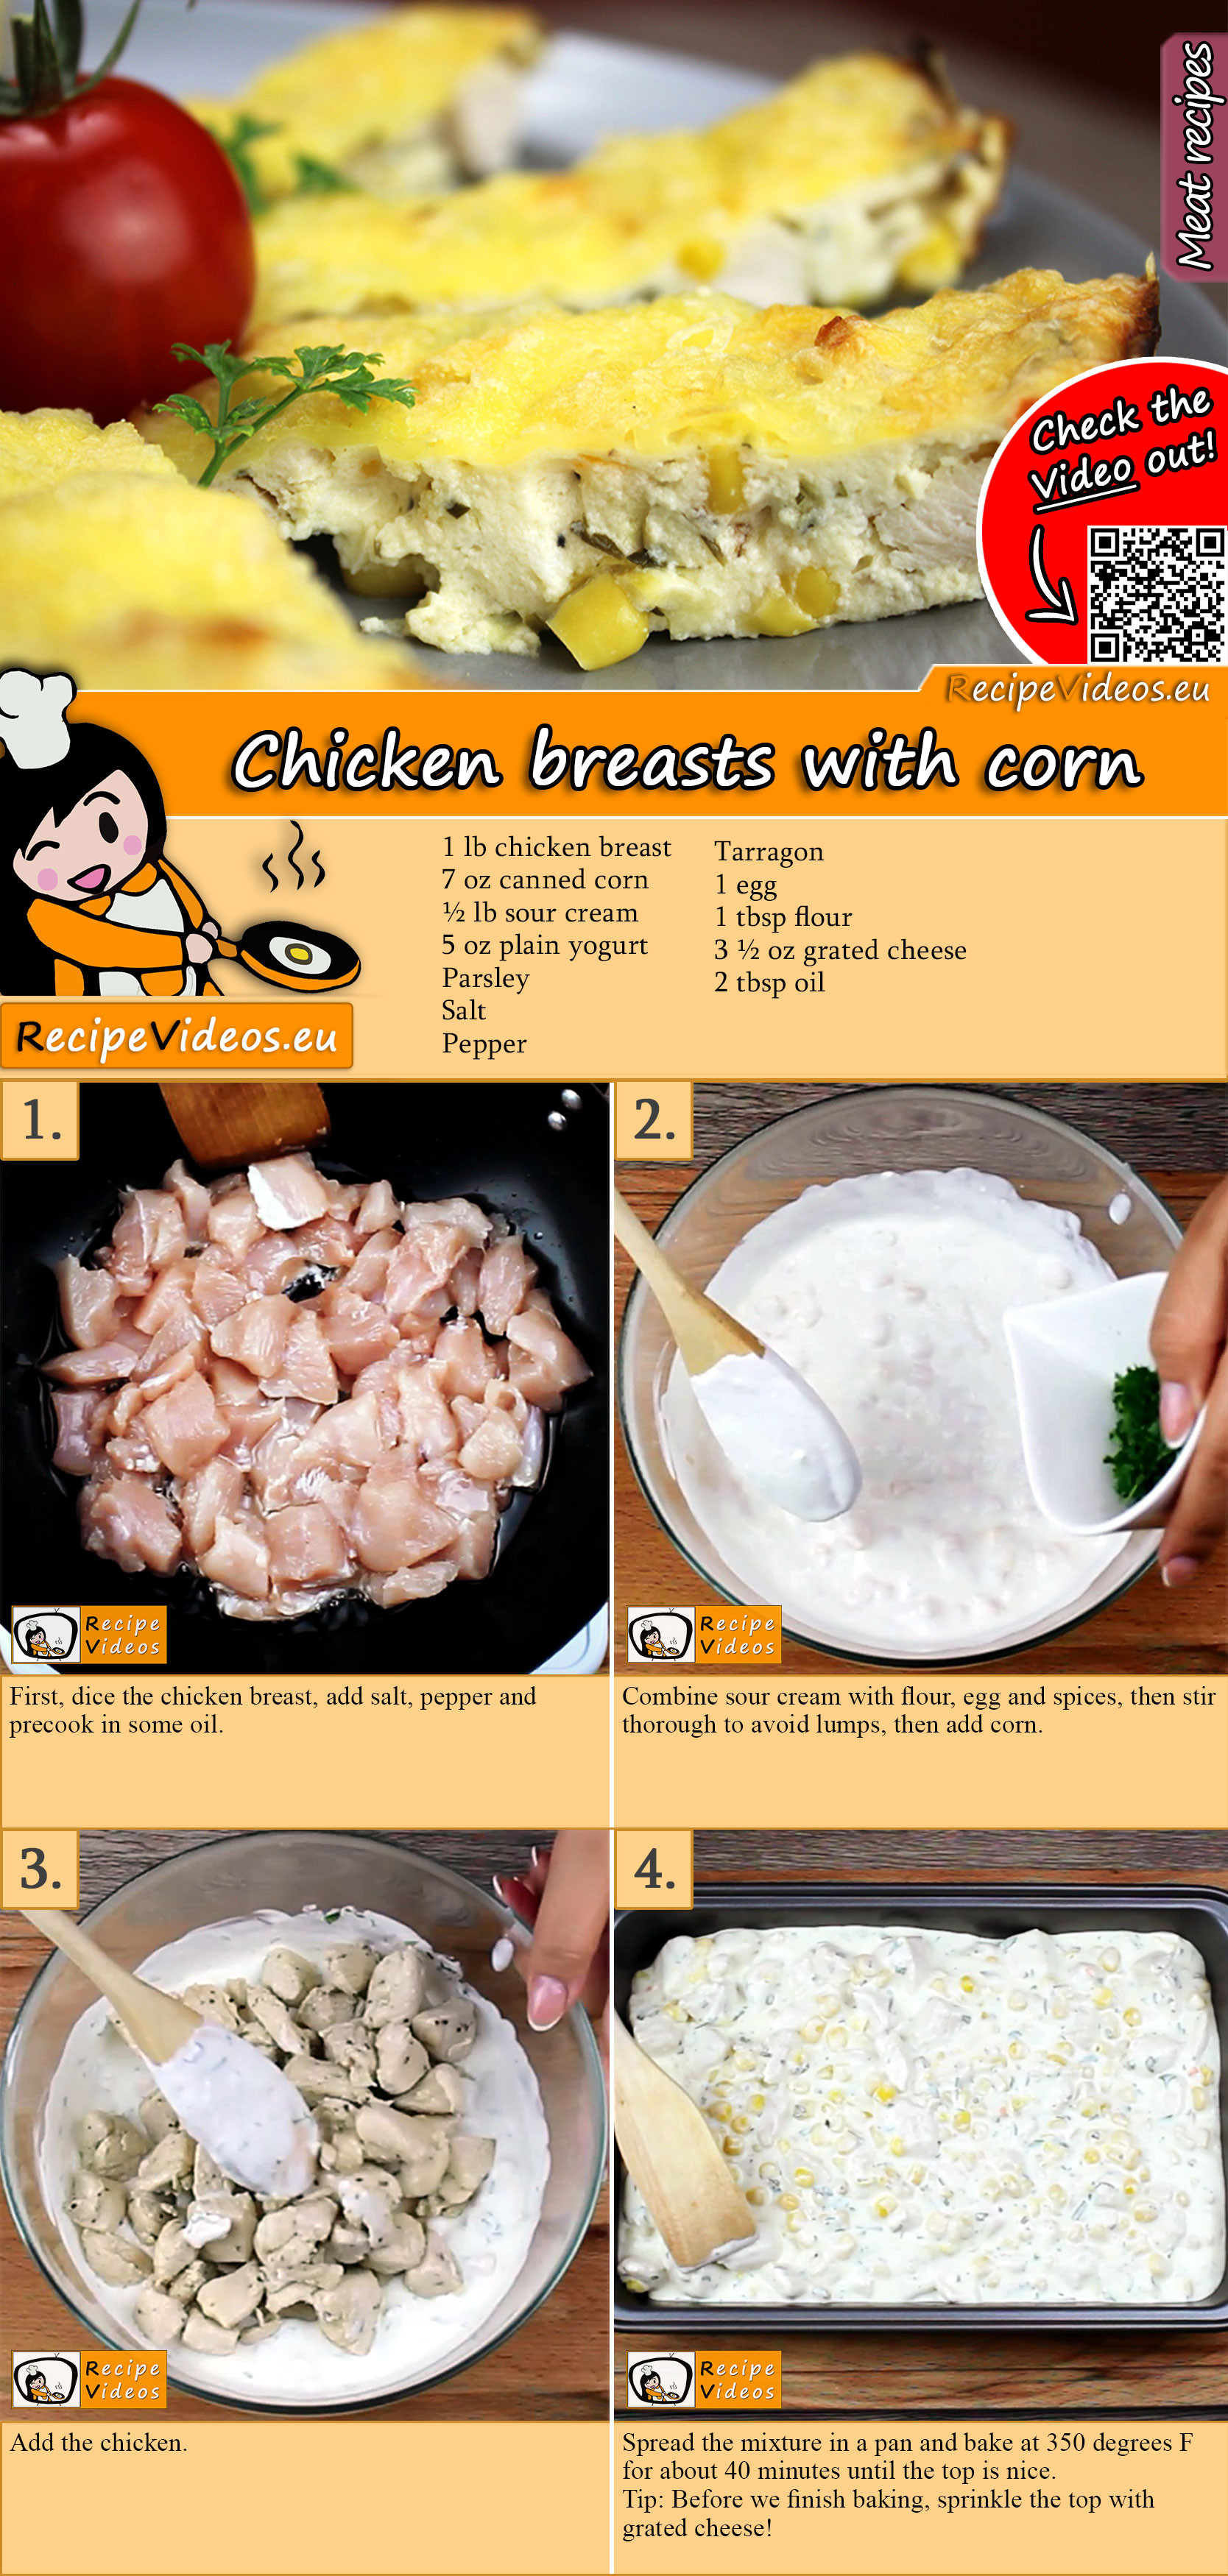 Chicken breasts with corn recipe with video